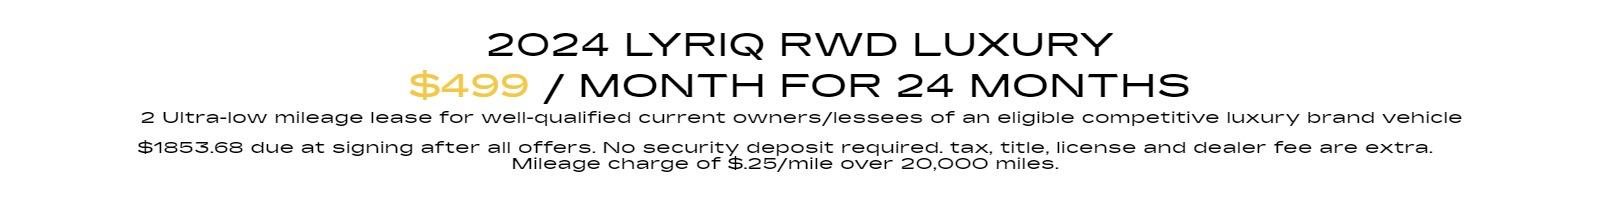 2024 Lyriq RWD LUXURY 2 Ultra-low mileage lease for well-qualified current owners/lessees of an eligible competitive luxury brand vehicle $499 per month 24 months. $1853.68 due at signing after all offers. No security deposit required. tax, title, license and dealer fee are extra. Mileage charge of $.25/mile over 20,000 miles.